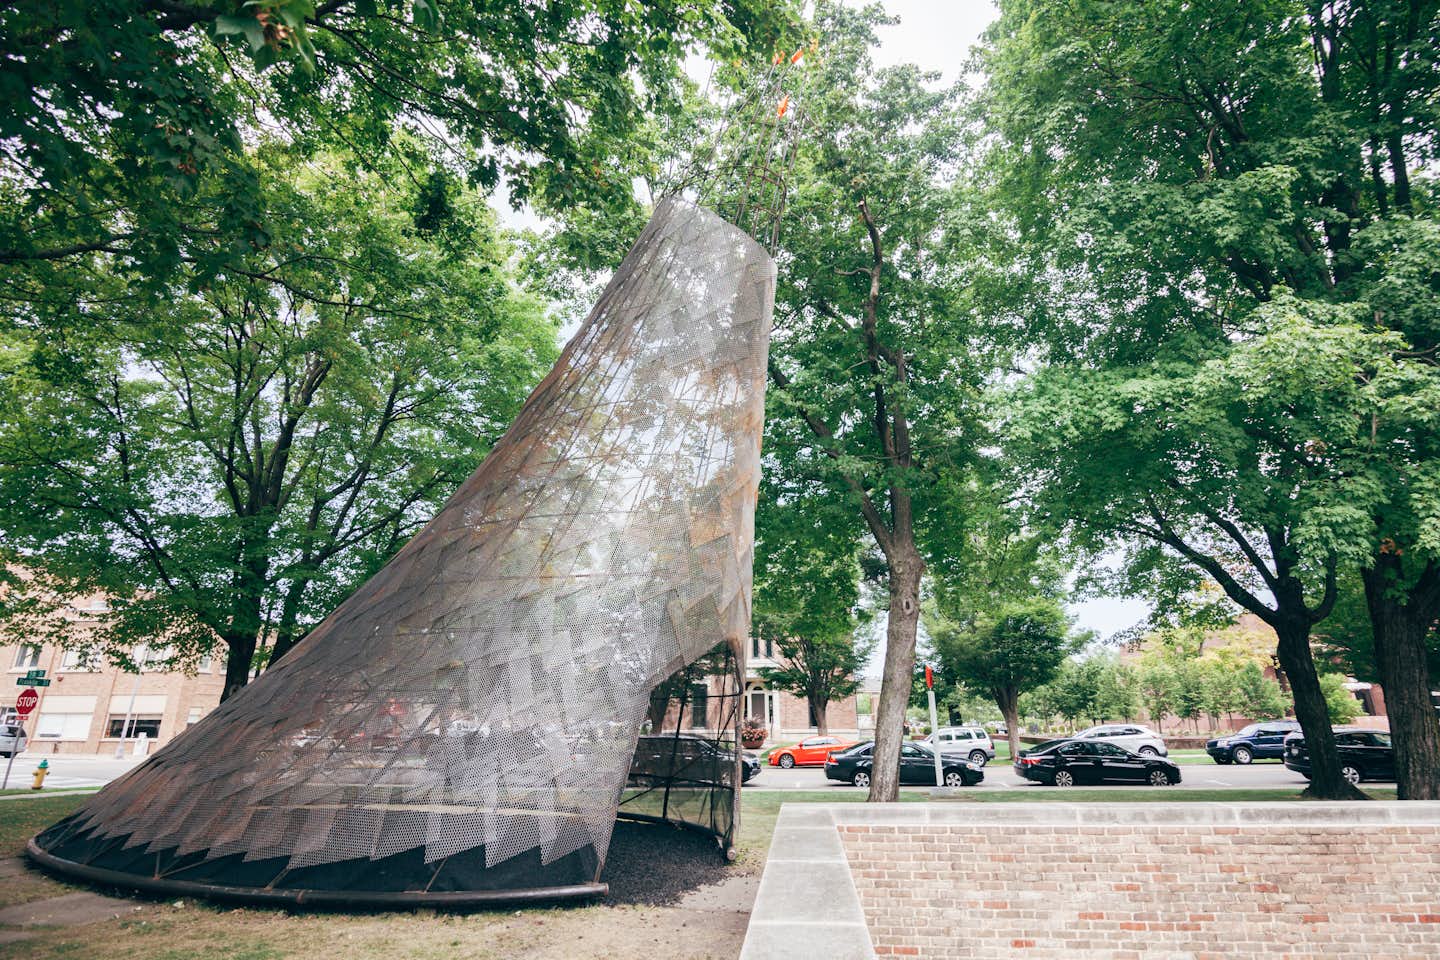 Made of rebar and copper scales, Wiikiaami is a contemporary riff on the "wigwam"—"wiikiaami" in the language of the Myaamia people indigenous to Indiana. It was built in front of Eliel Saarinen’s First Christian Church in Columbus, Indiana.